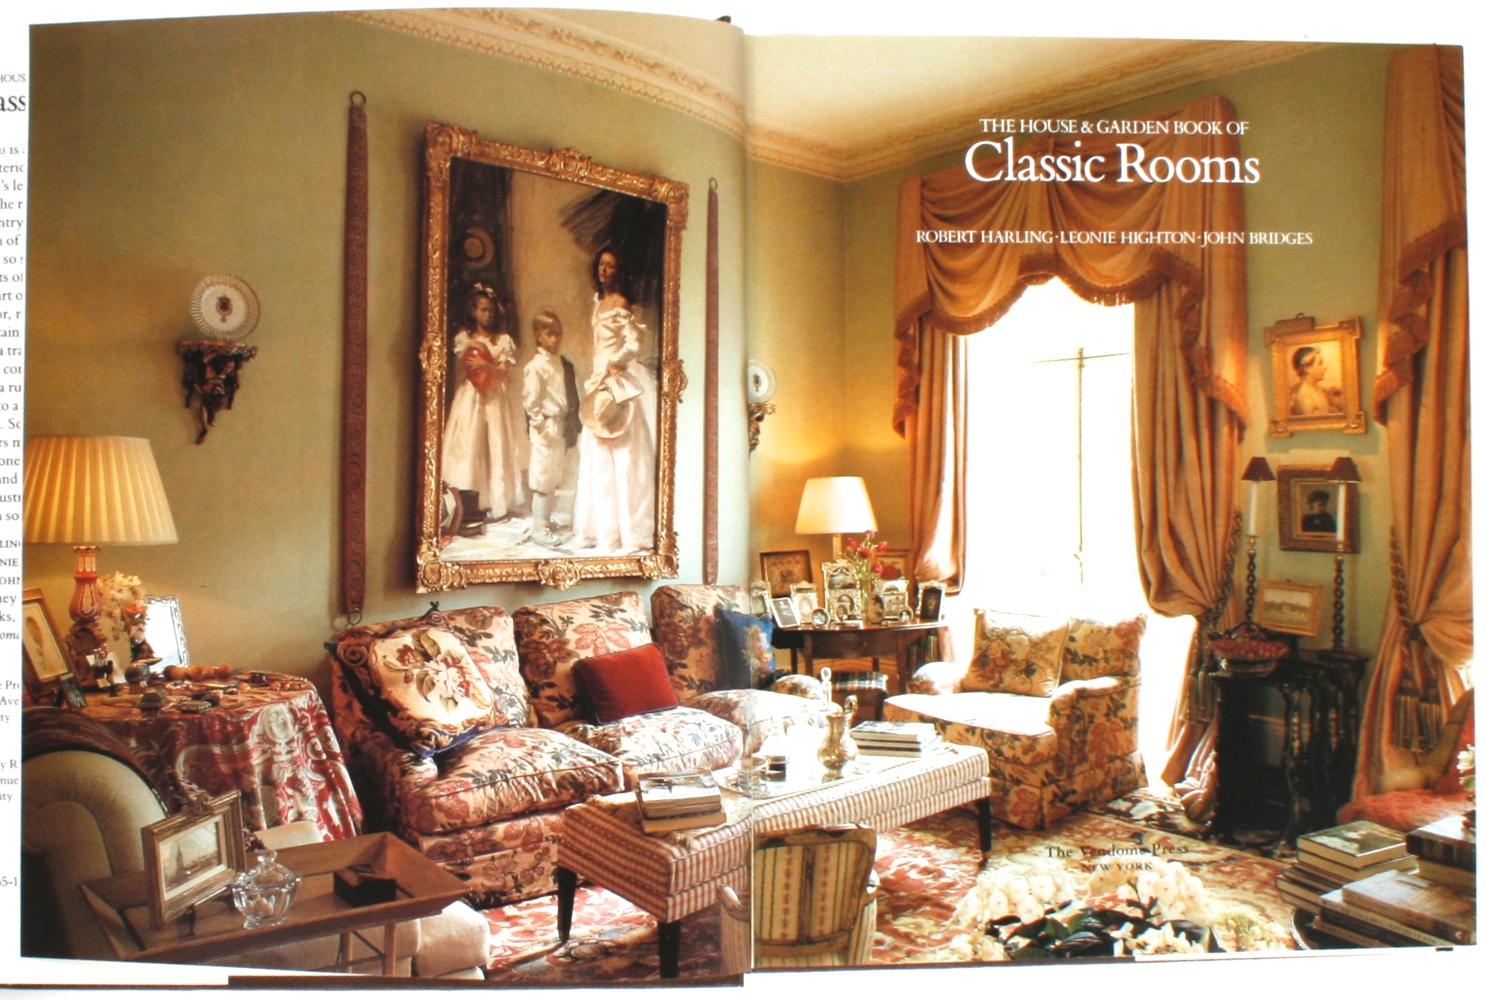 The House and Garden Book of Classic Rooms by Robert Harling, Leonie Highton, and John Bridges. Vendome Press, NY, 1990. First Edition hardcover with dust jacket. An illustrated book of interiors with 240 color photos representing emerging